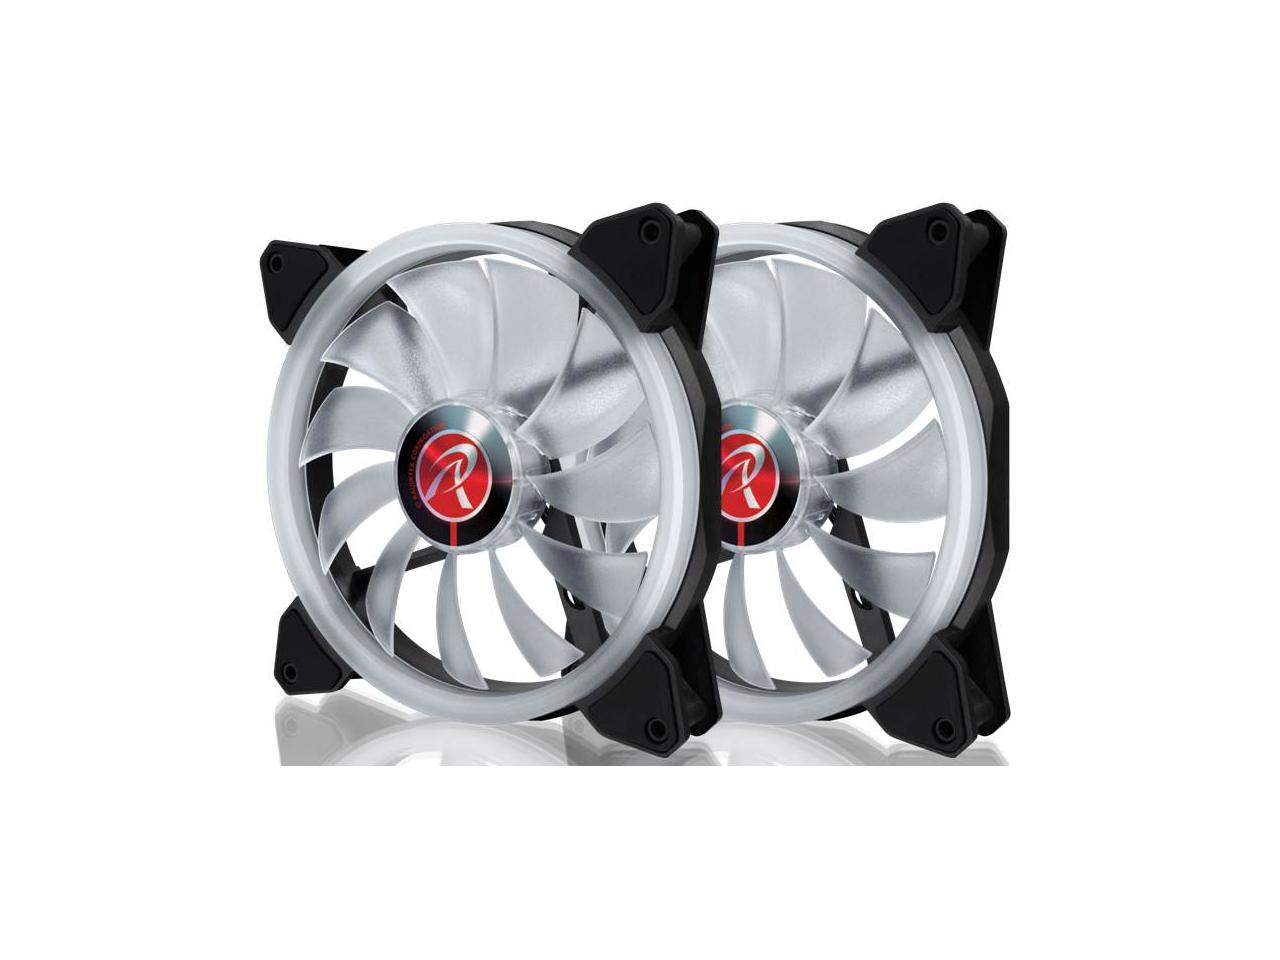 IRIS 14 RBW ADD -2 pack, 14025 Addressable RGB PWM fan, with 8 port Addressable LED hub, Remote controller & Connecting M/B cable, compatible with ASUS/MSI 5V ADD header